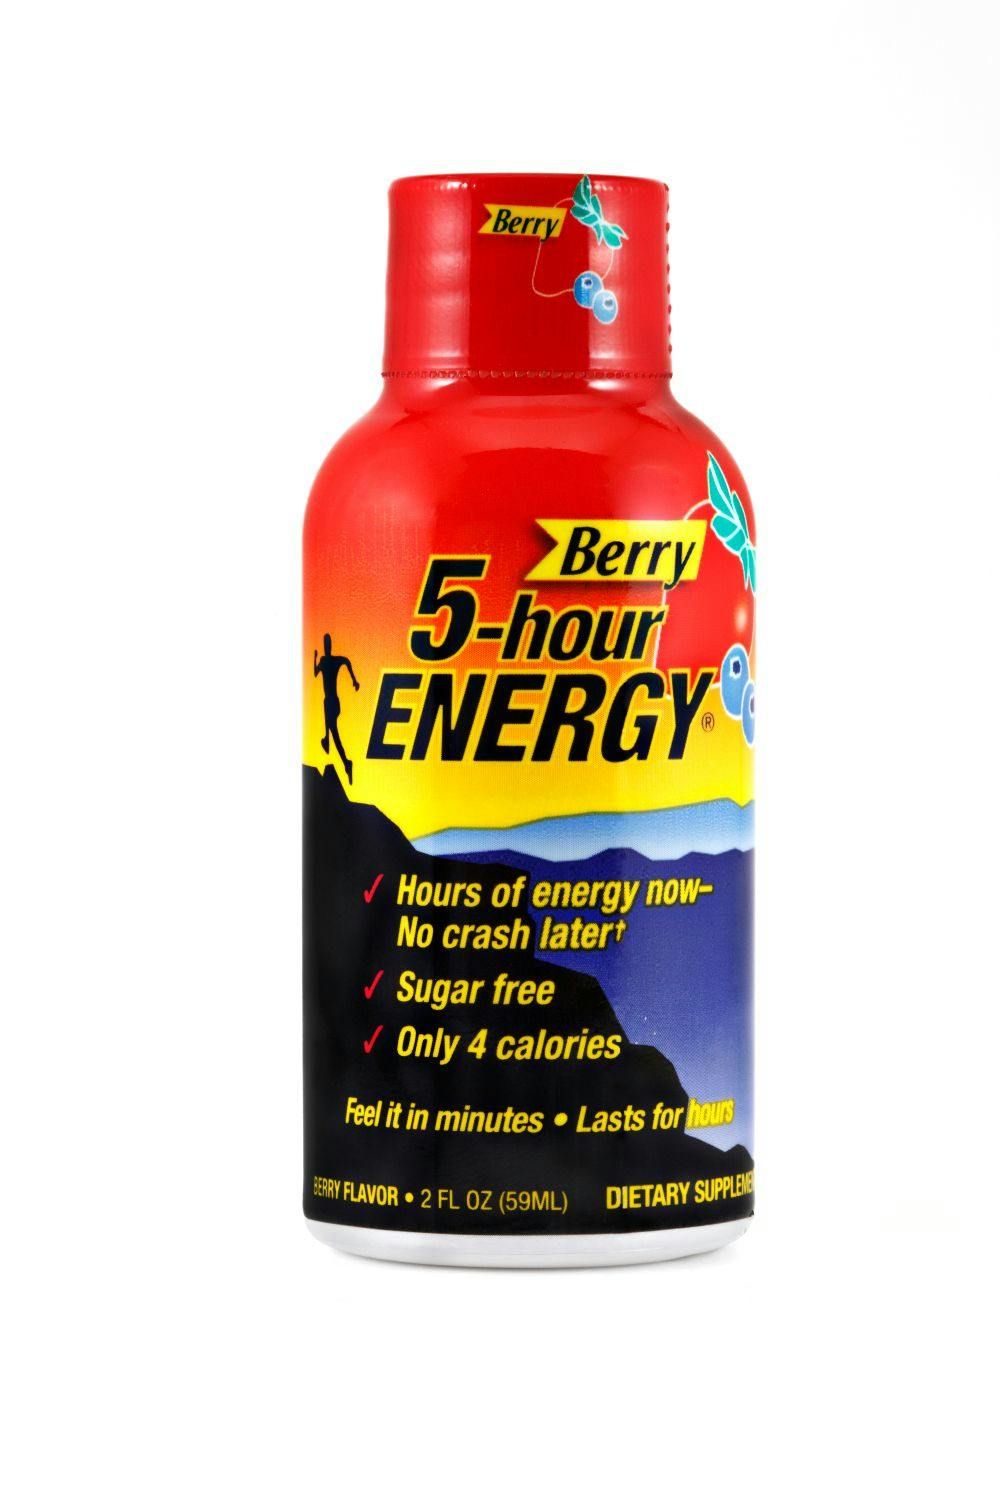 Energy Shot Sales Are Slumping. Do Energy Shots Still Have a Chance?